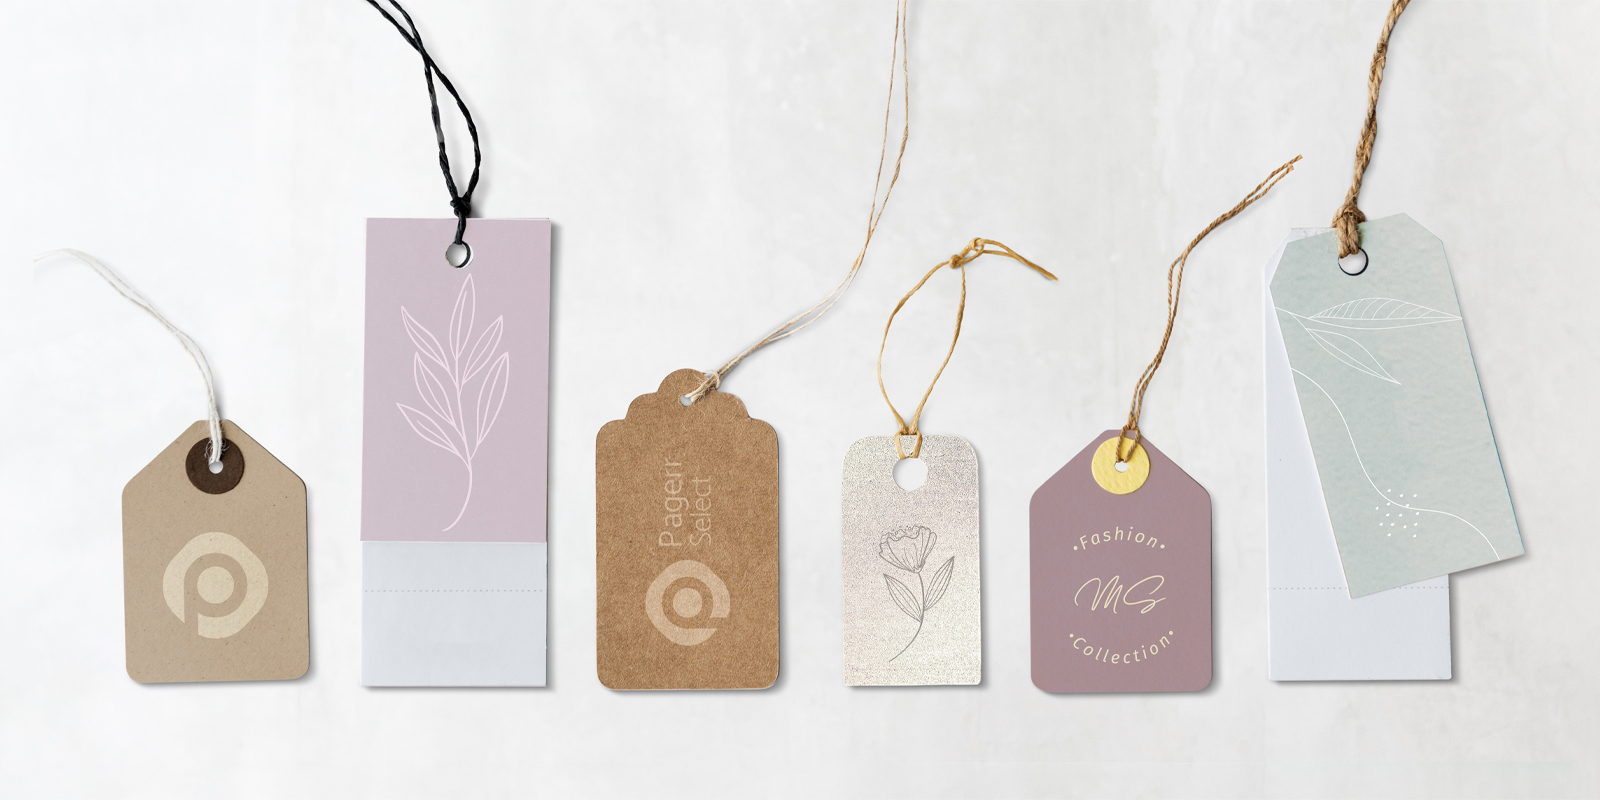 Product tags in Canberra - Print with Pagerr